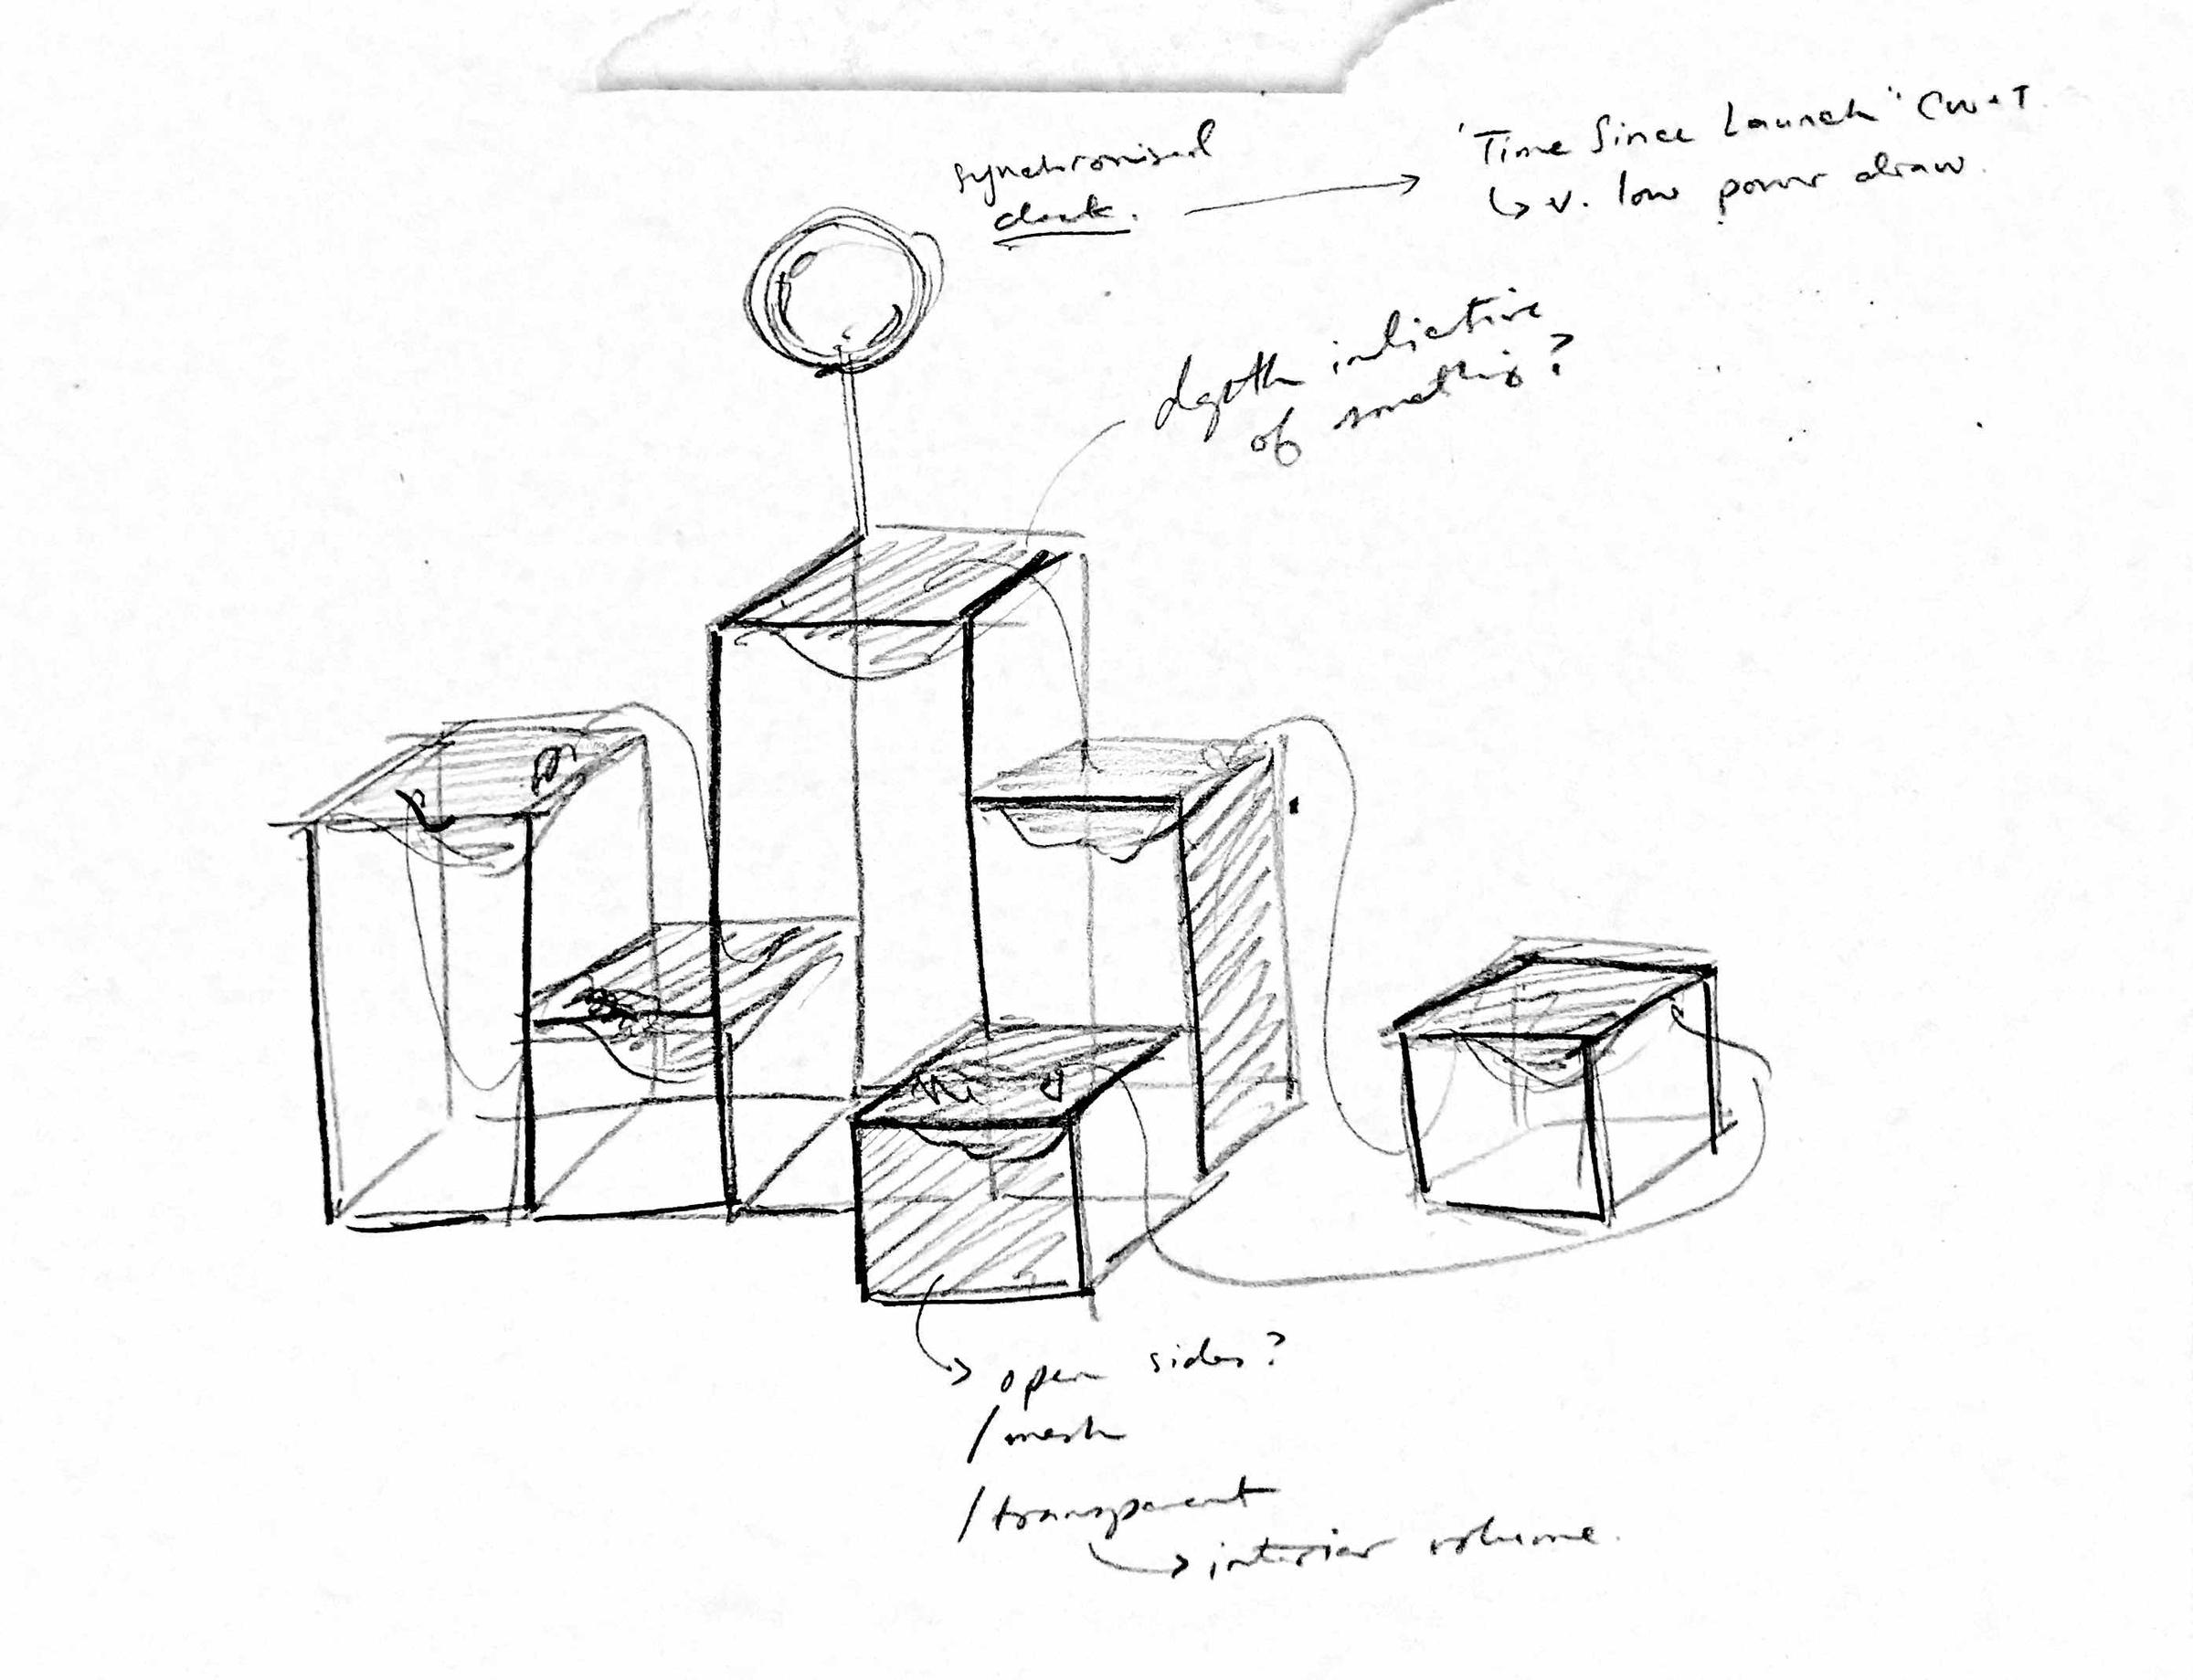 sketch of the pentacell installation